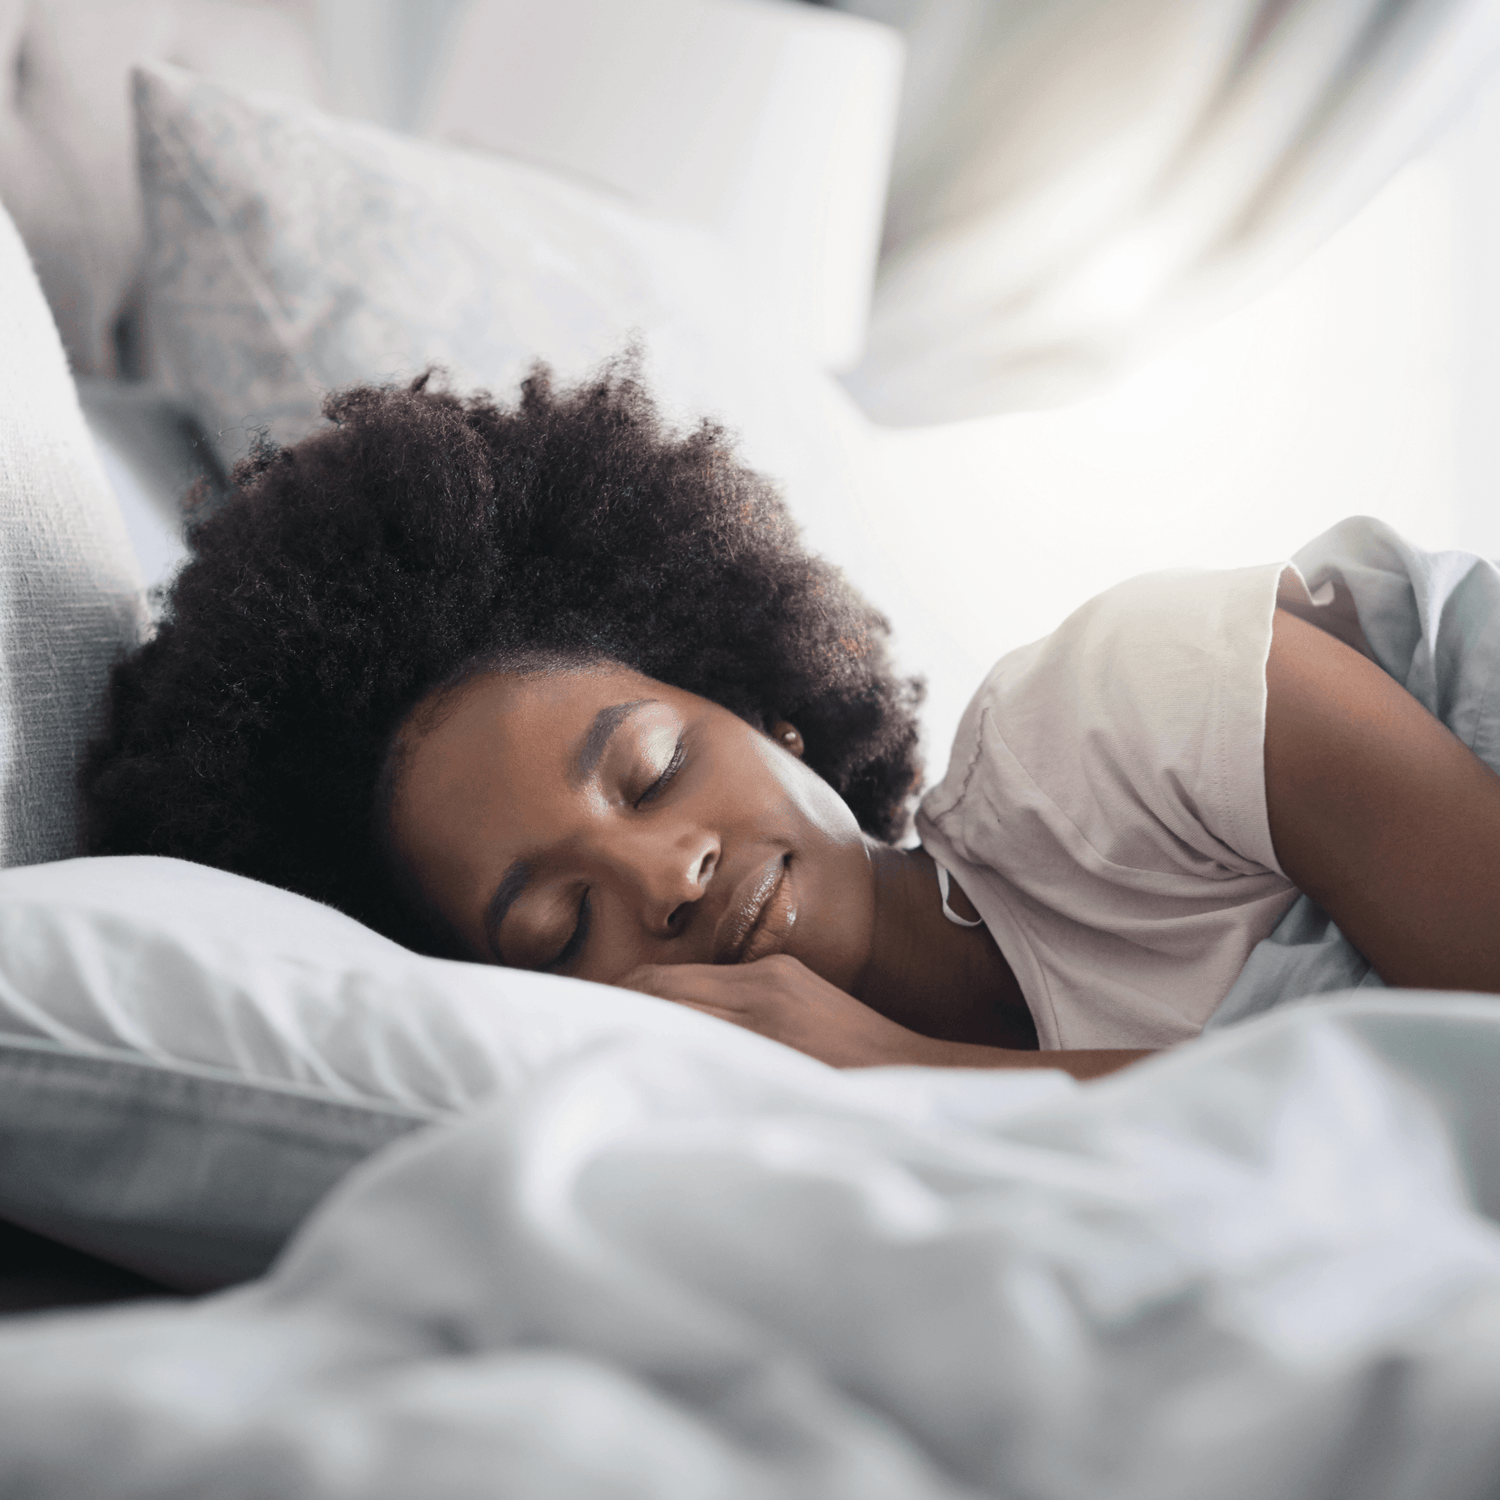 How can I get a better night's sleep?